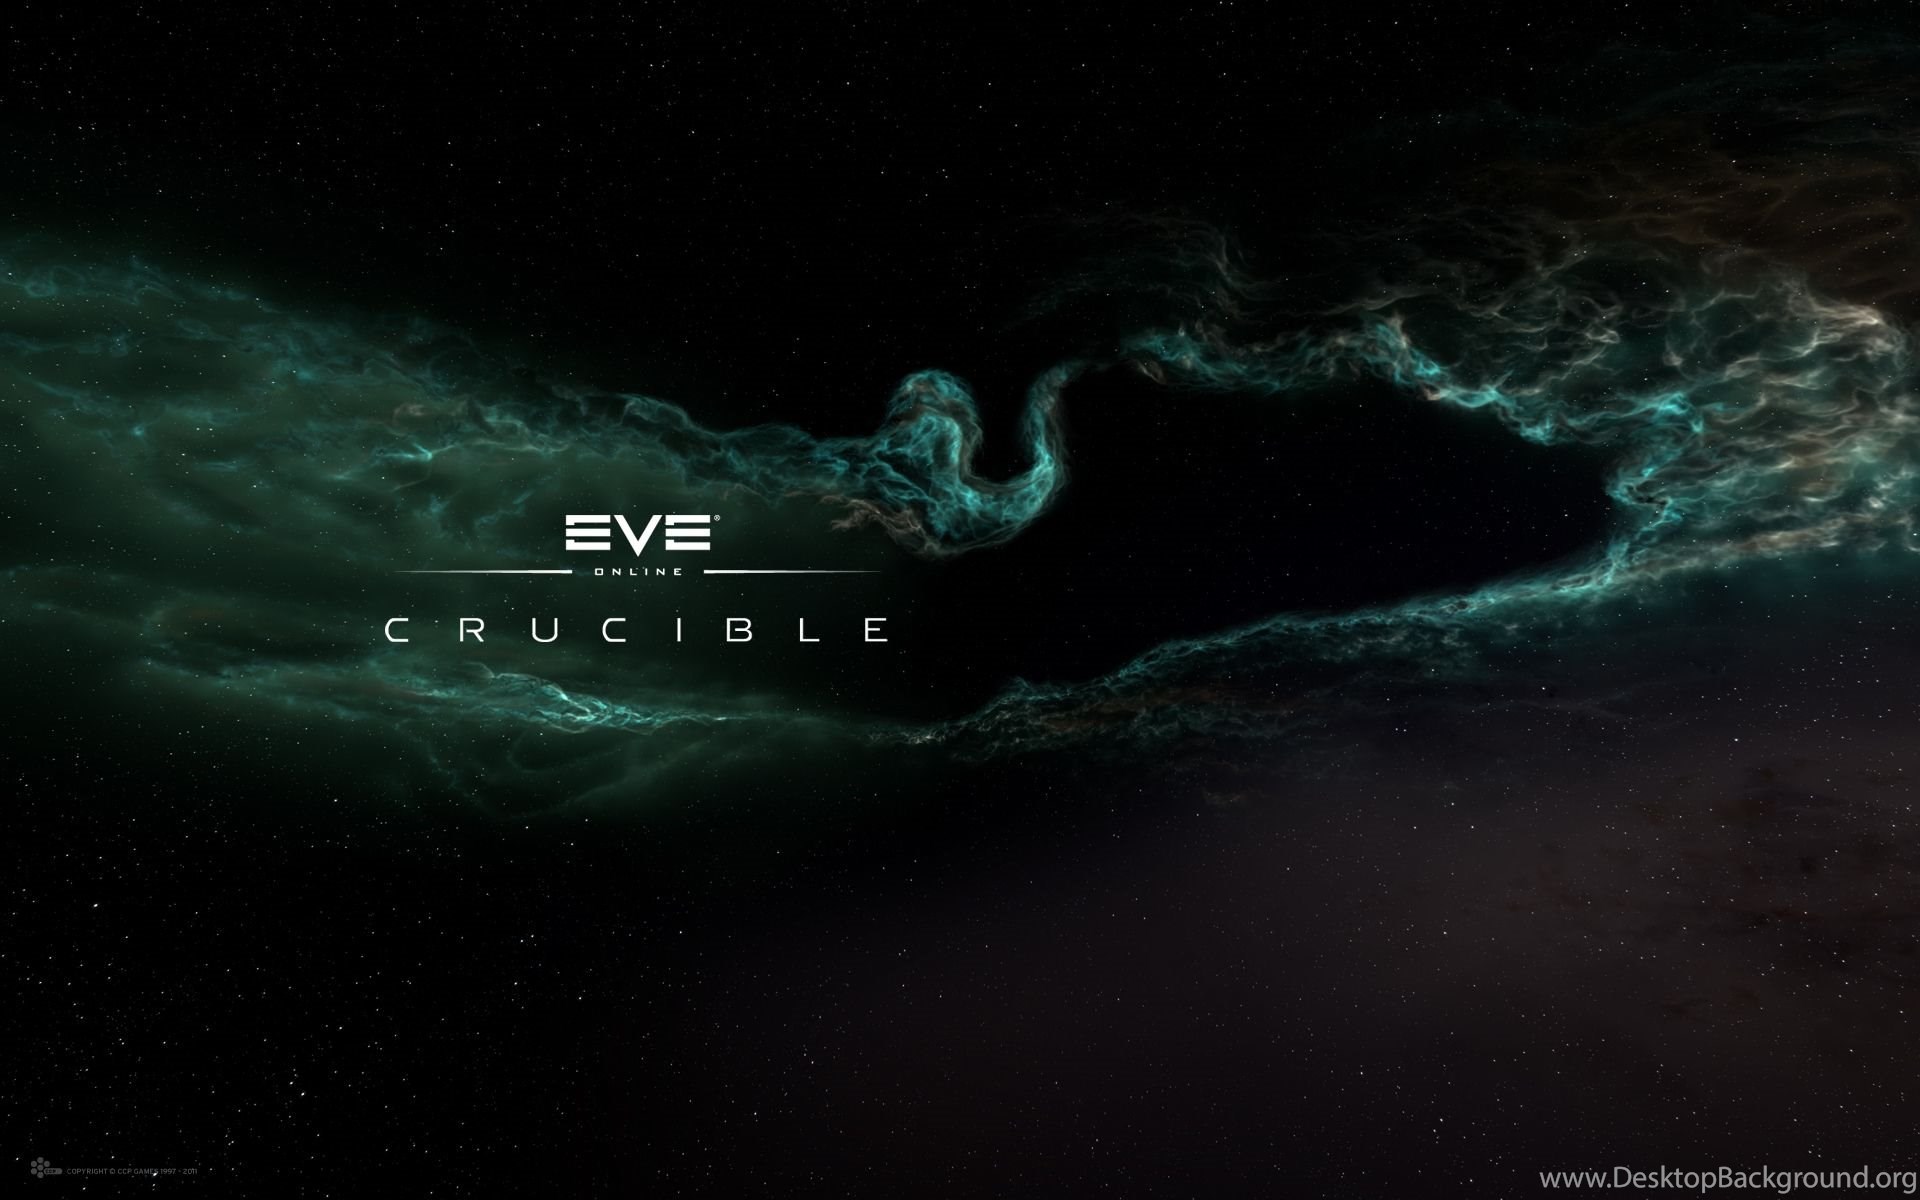 Eve Online Nebula Wallpapers Pics About Space Desktop Background Images, Photos, Reviews